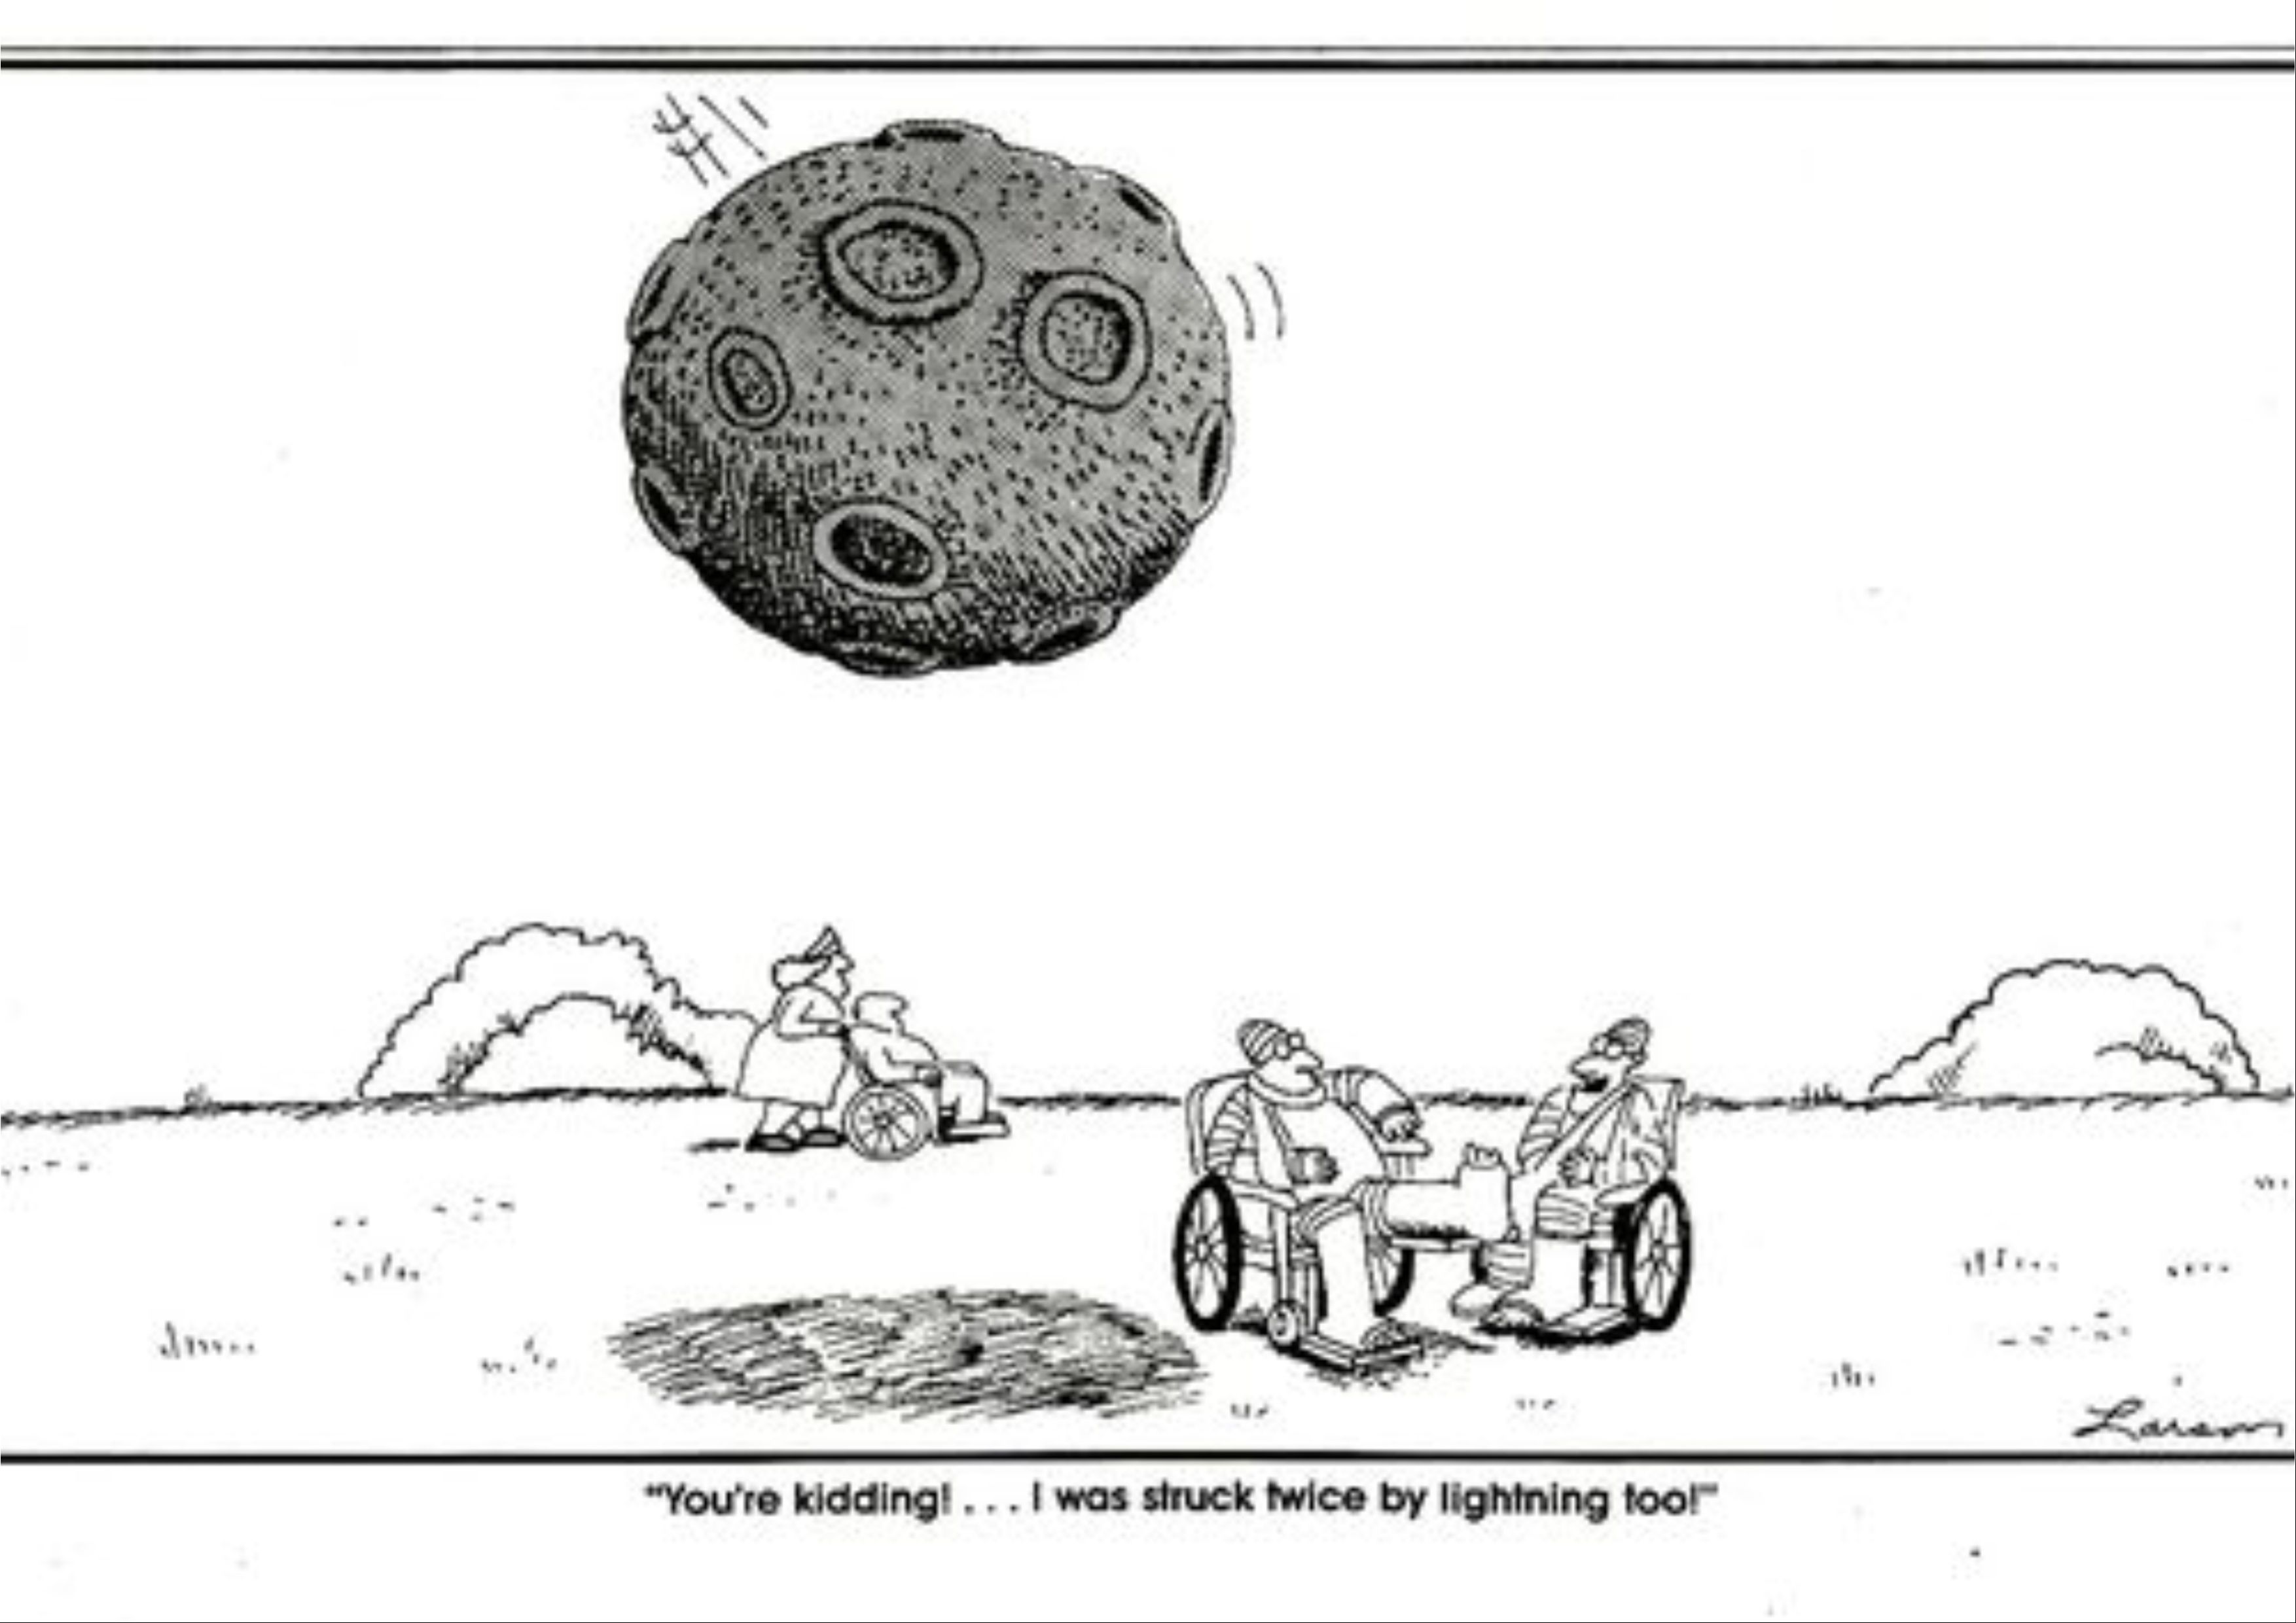 10 Far Side Comics That Make the End of the World Funny